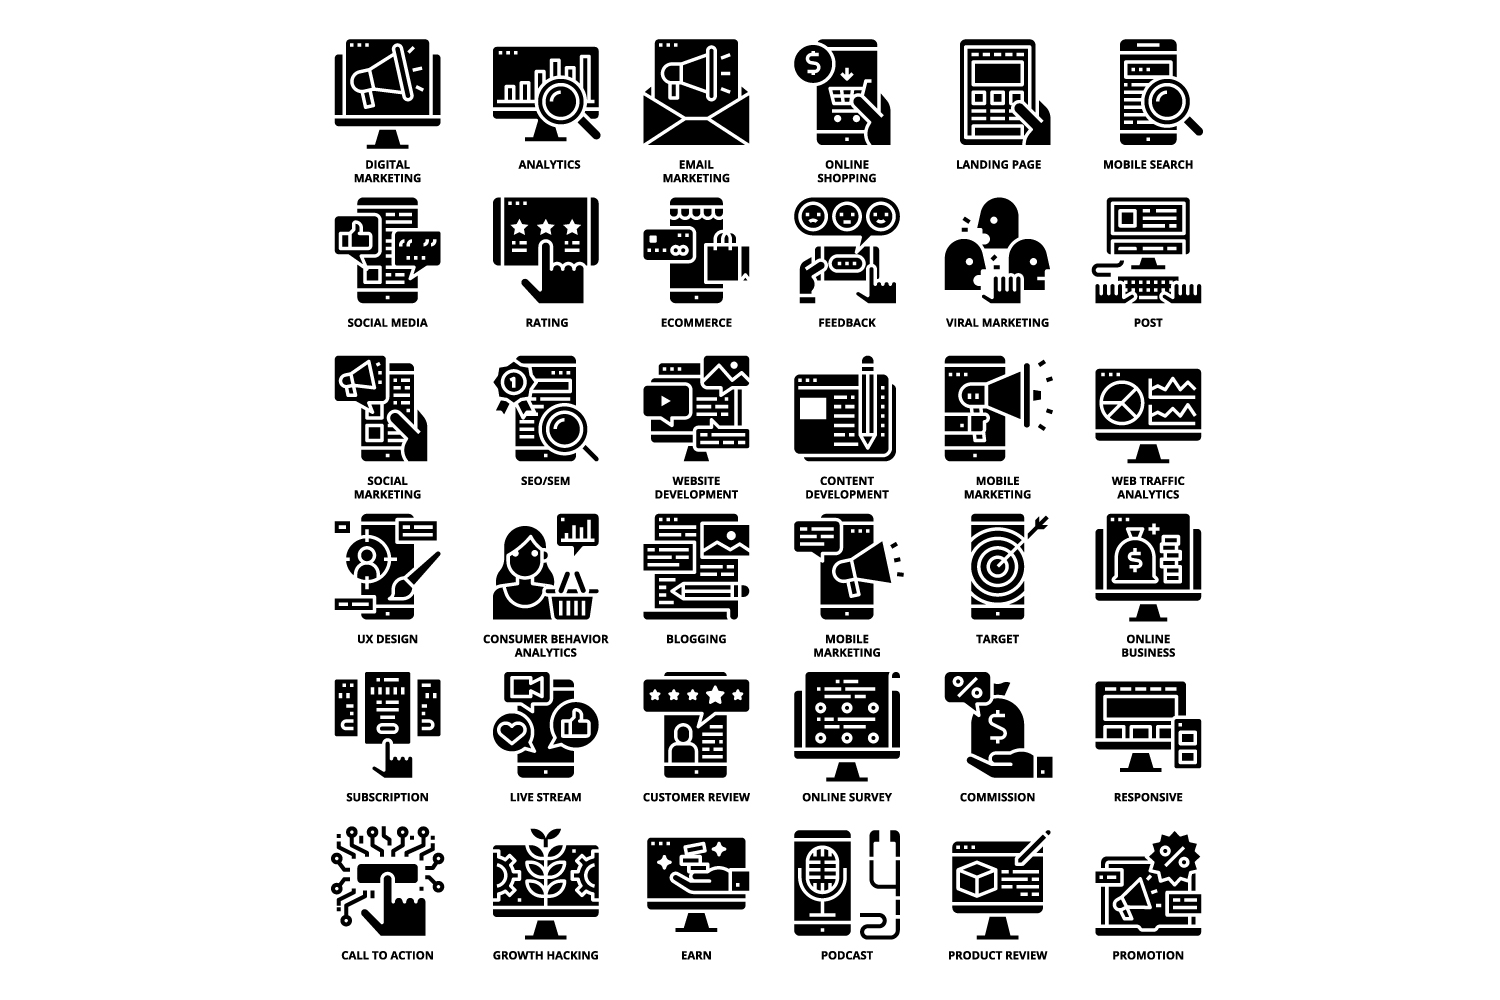 Series of black and white icons depicting different types of computers.